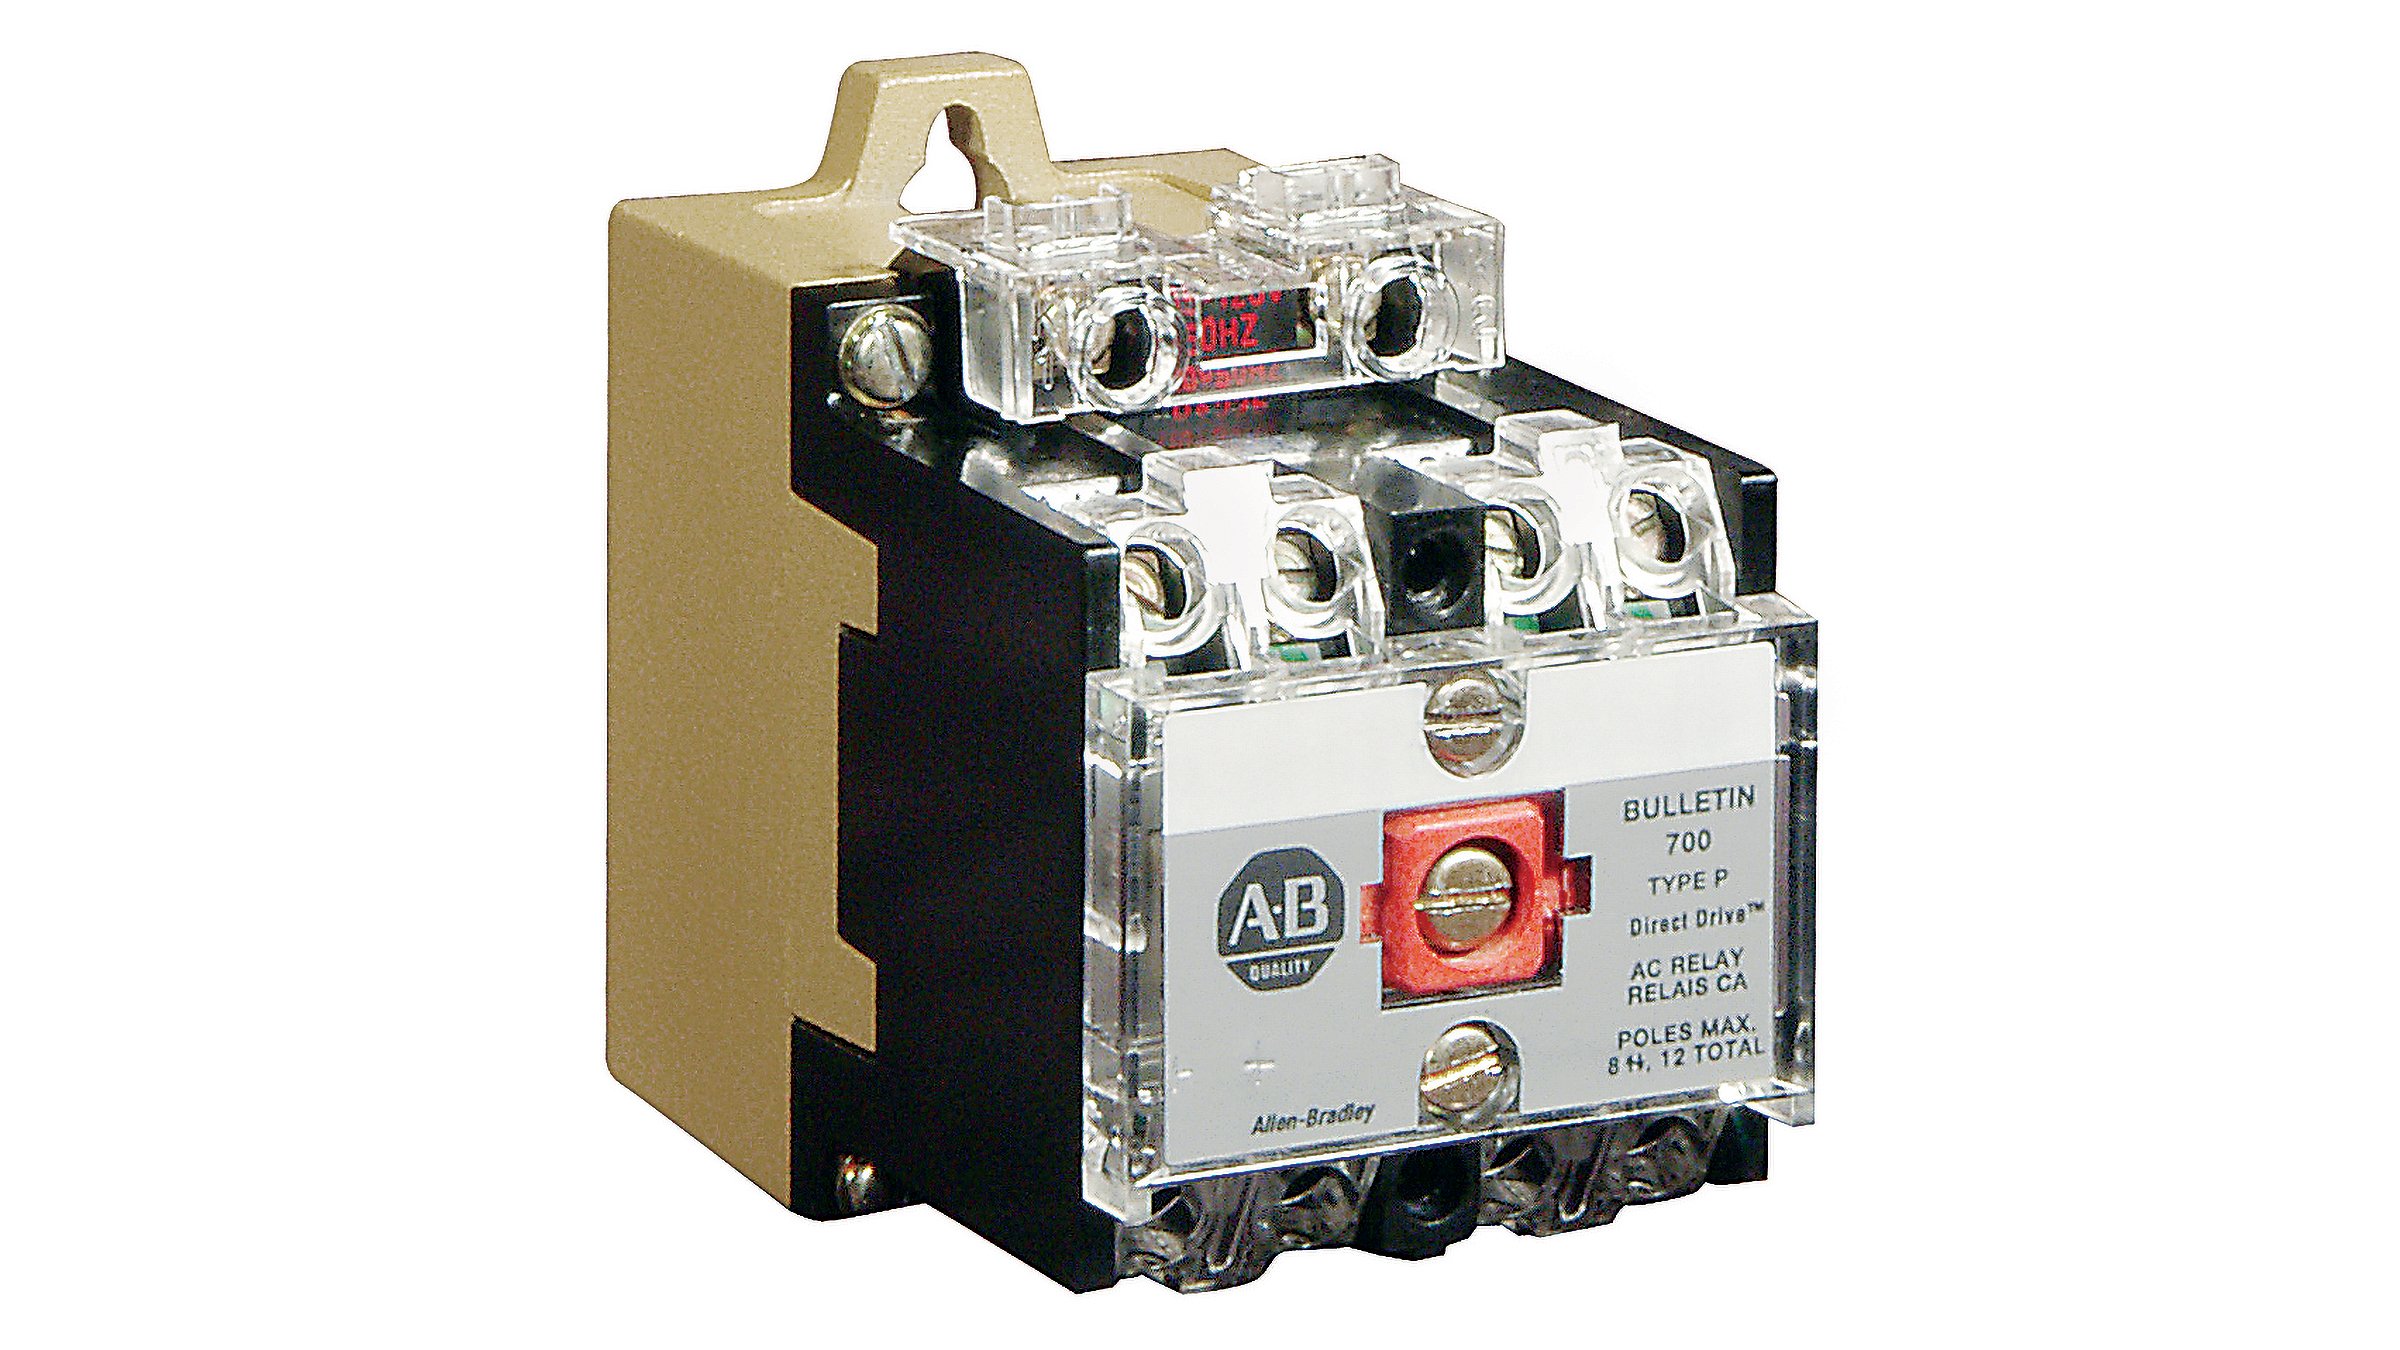 Allen-Bradley Bulletin 700-P, 700-PH and 700-PK Heavy Duty Relays have four types of contact cartridges to meet your specific switching requirements.